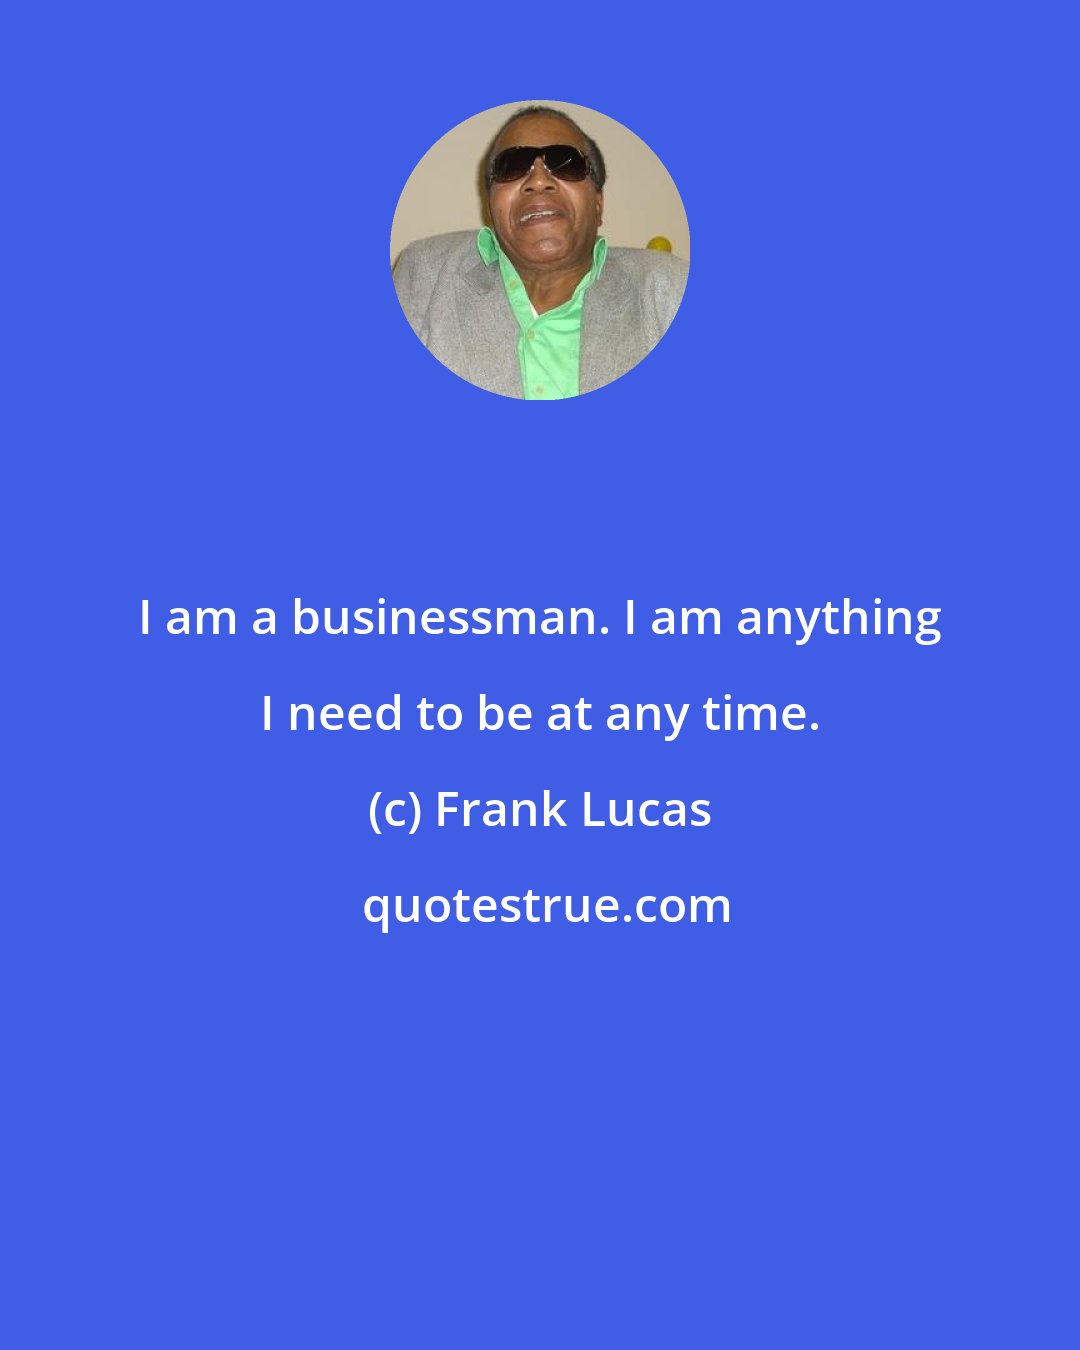 Frank Lucas: I am a businessman. I am anything I need to be at any time.